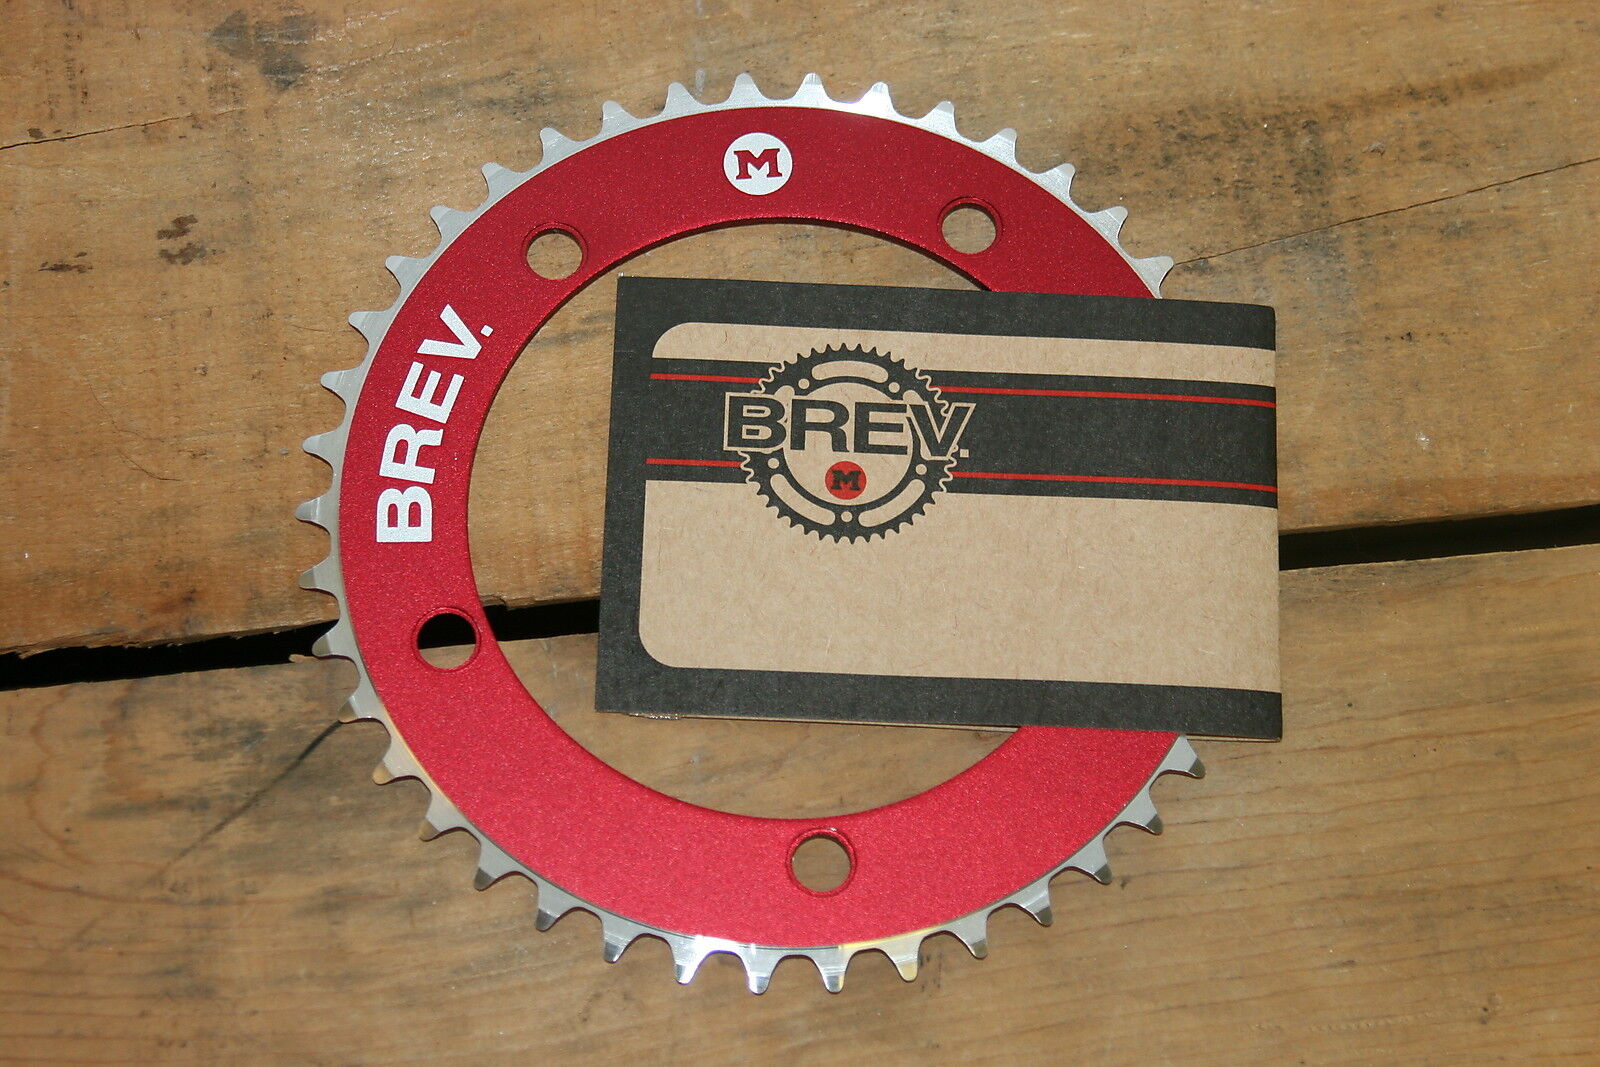 NEW Brev. M Masi Fixie Fixed Gear Chain Ring Sprocket Chainring 42t Red 130 BCD